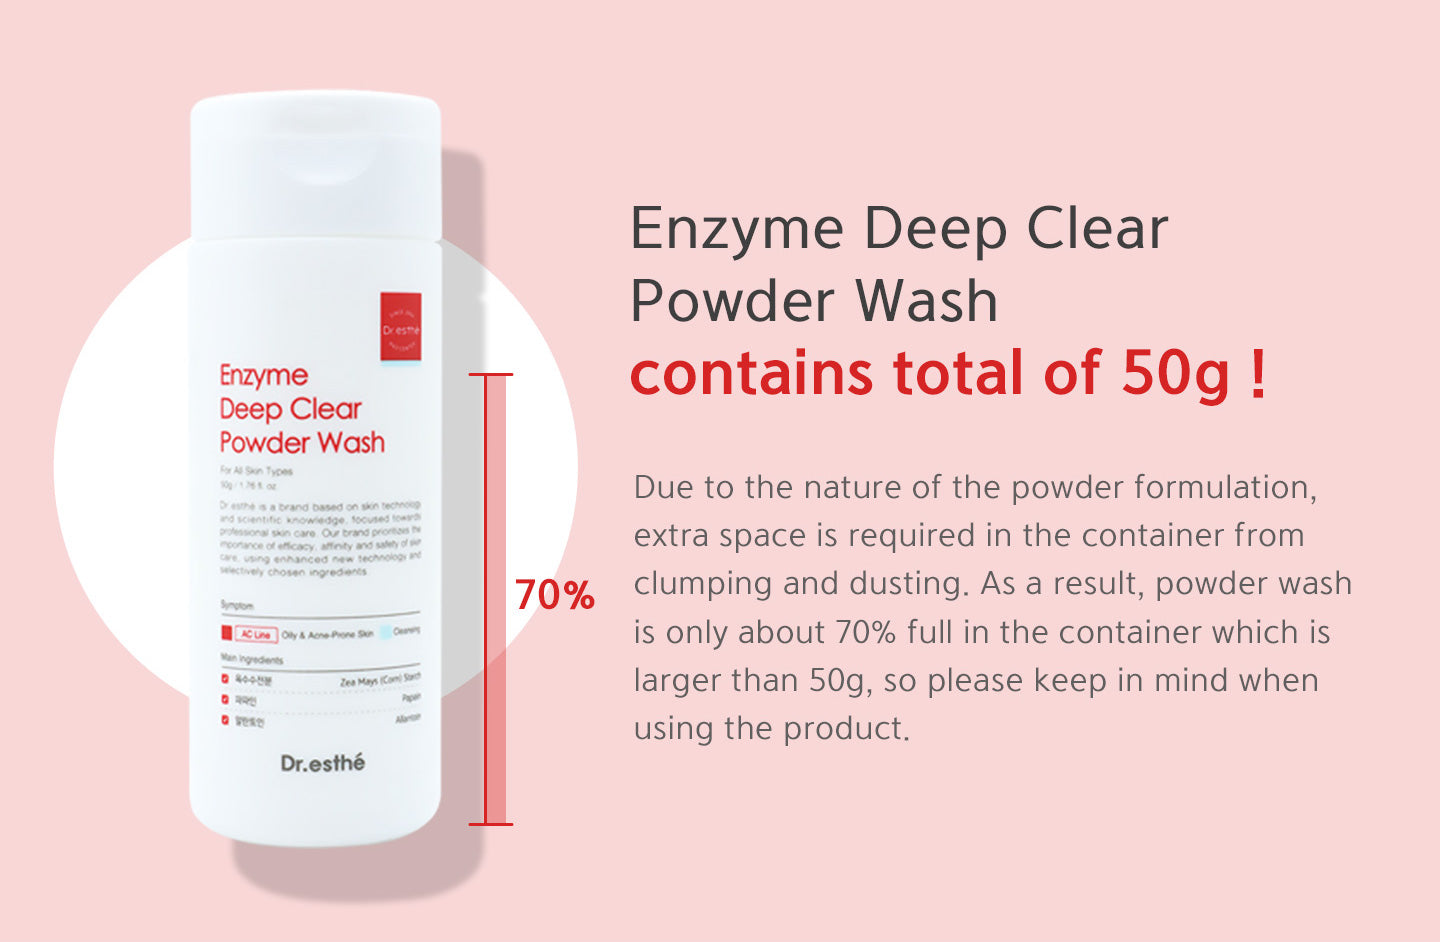 Due to the nature of the powder formulation, extra space is required in the container from clumping and dusting. As a result, powder wash is only about 70% full in the container which is larger than 50g, so please keep in mind when using the product. 